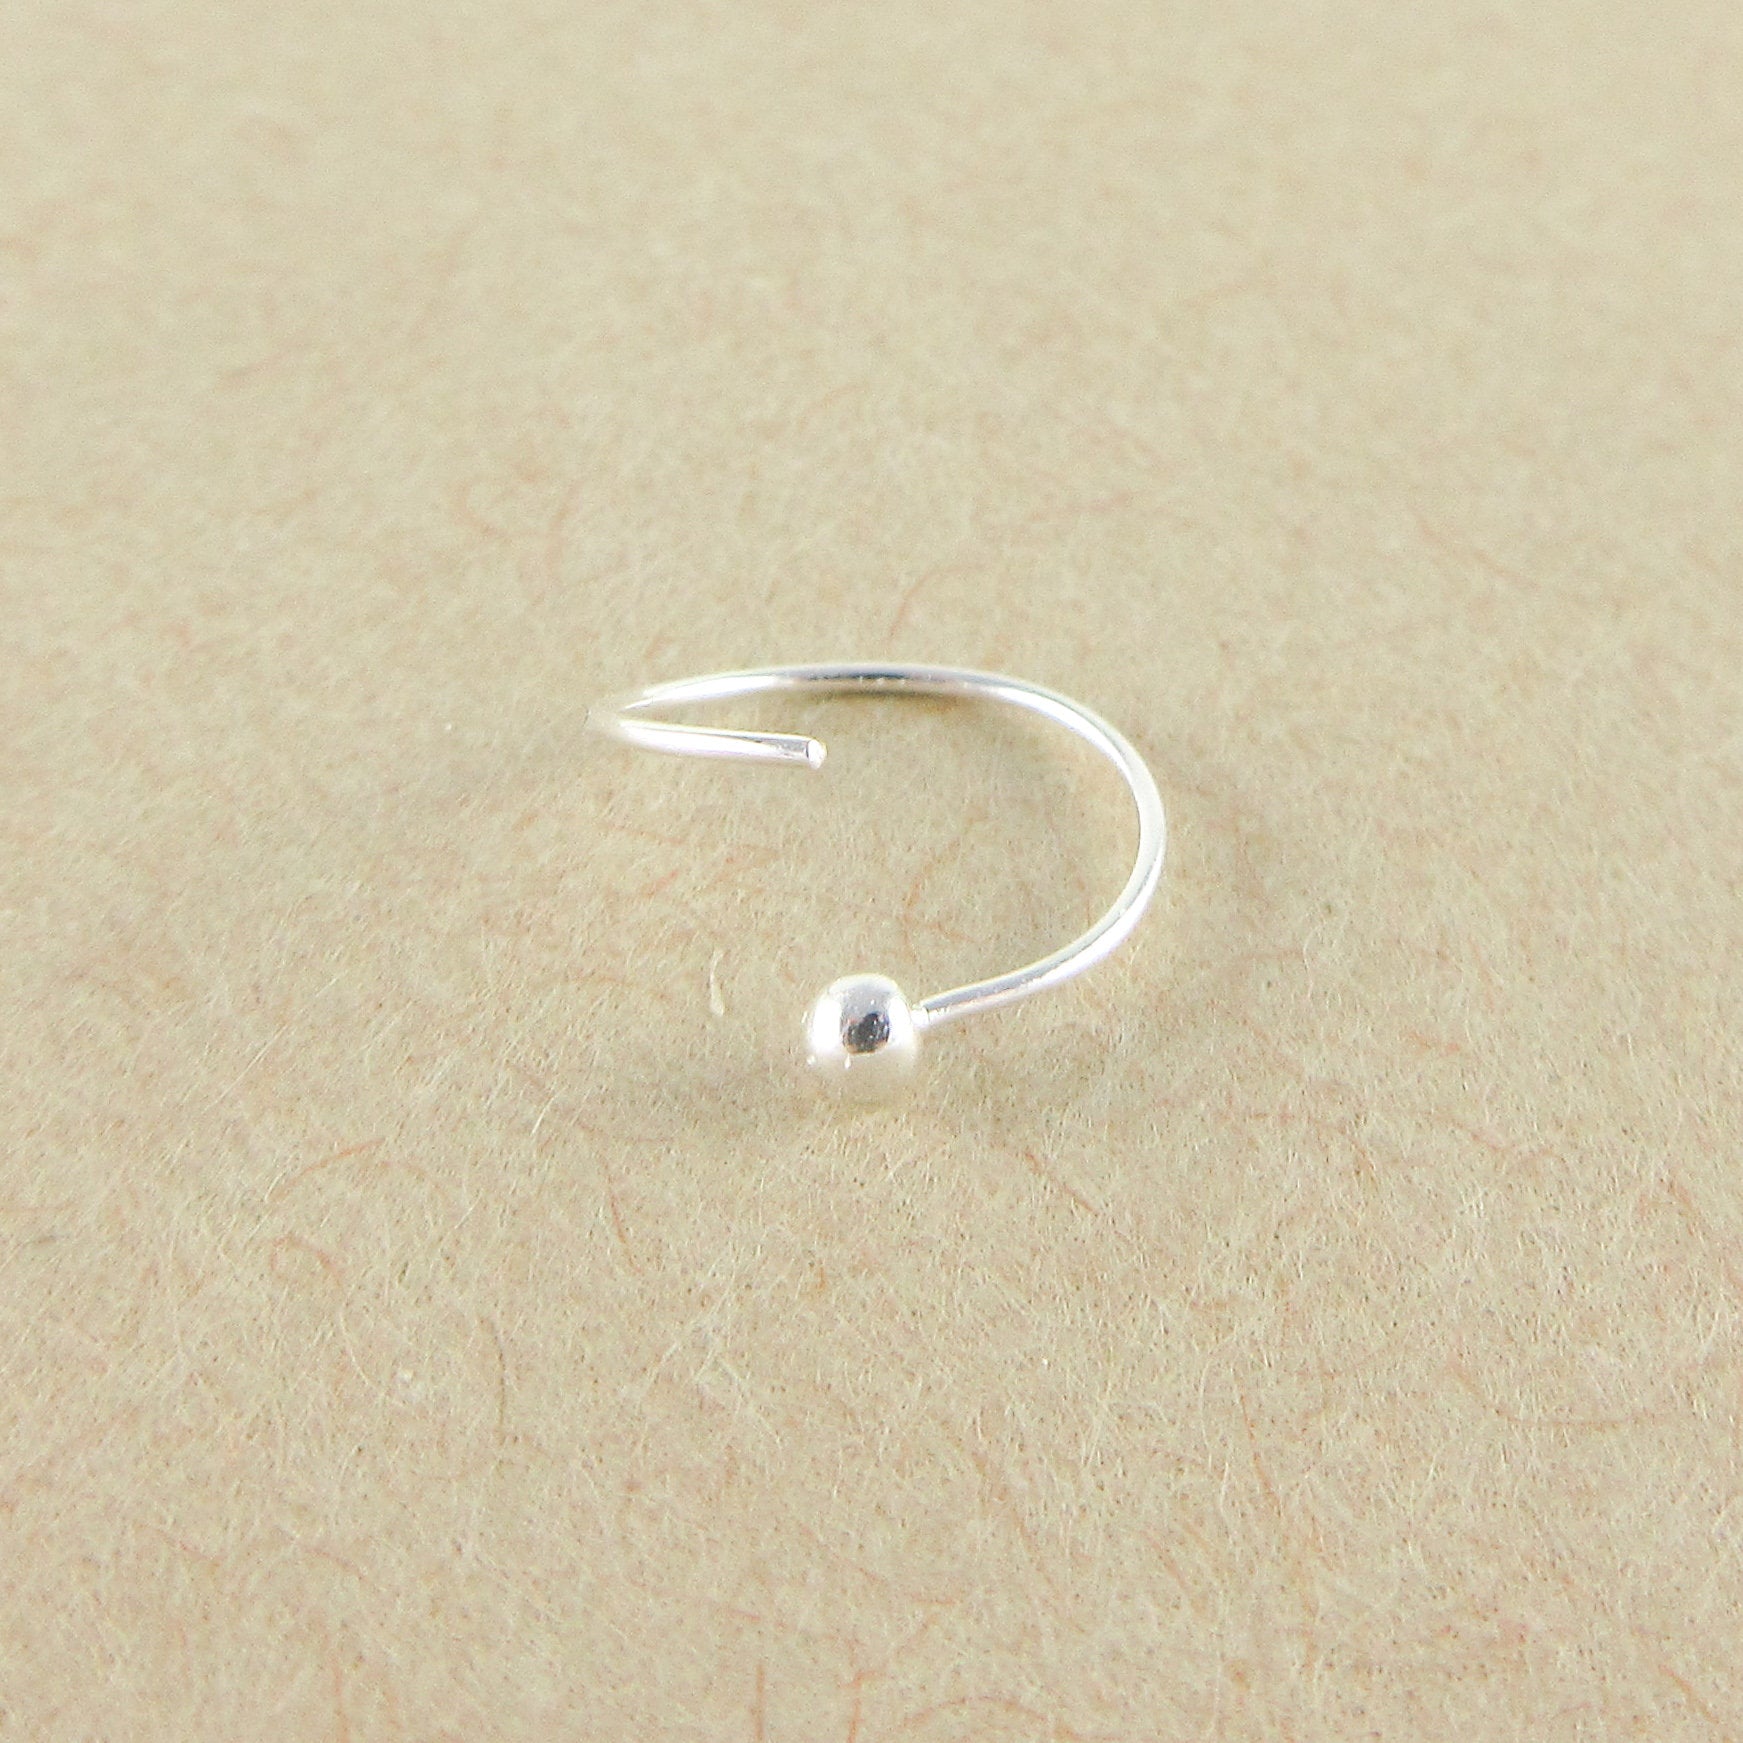 Surgical Steel Thin Small Silver Nose Ring Hoop 0.8mm Cartilage Piercing  Stud 2PCS | Wish